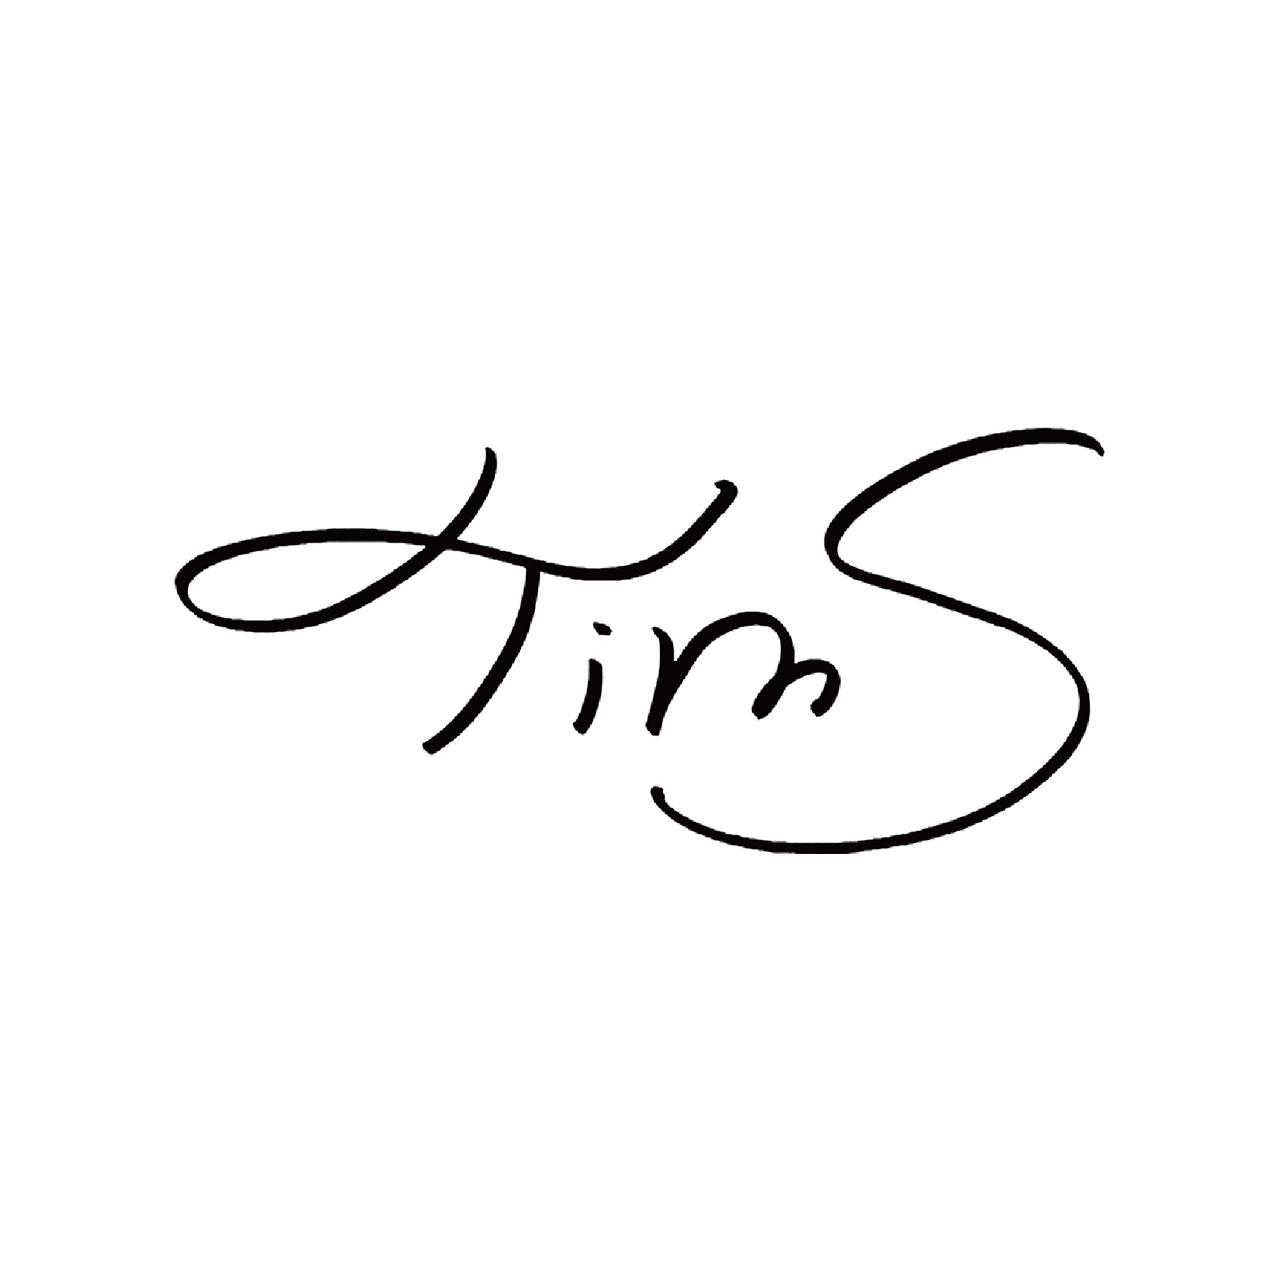 TimS